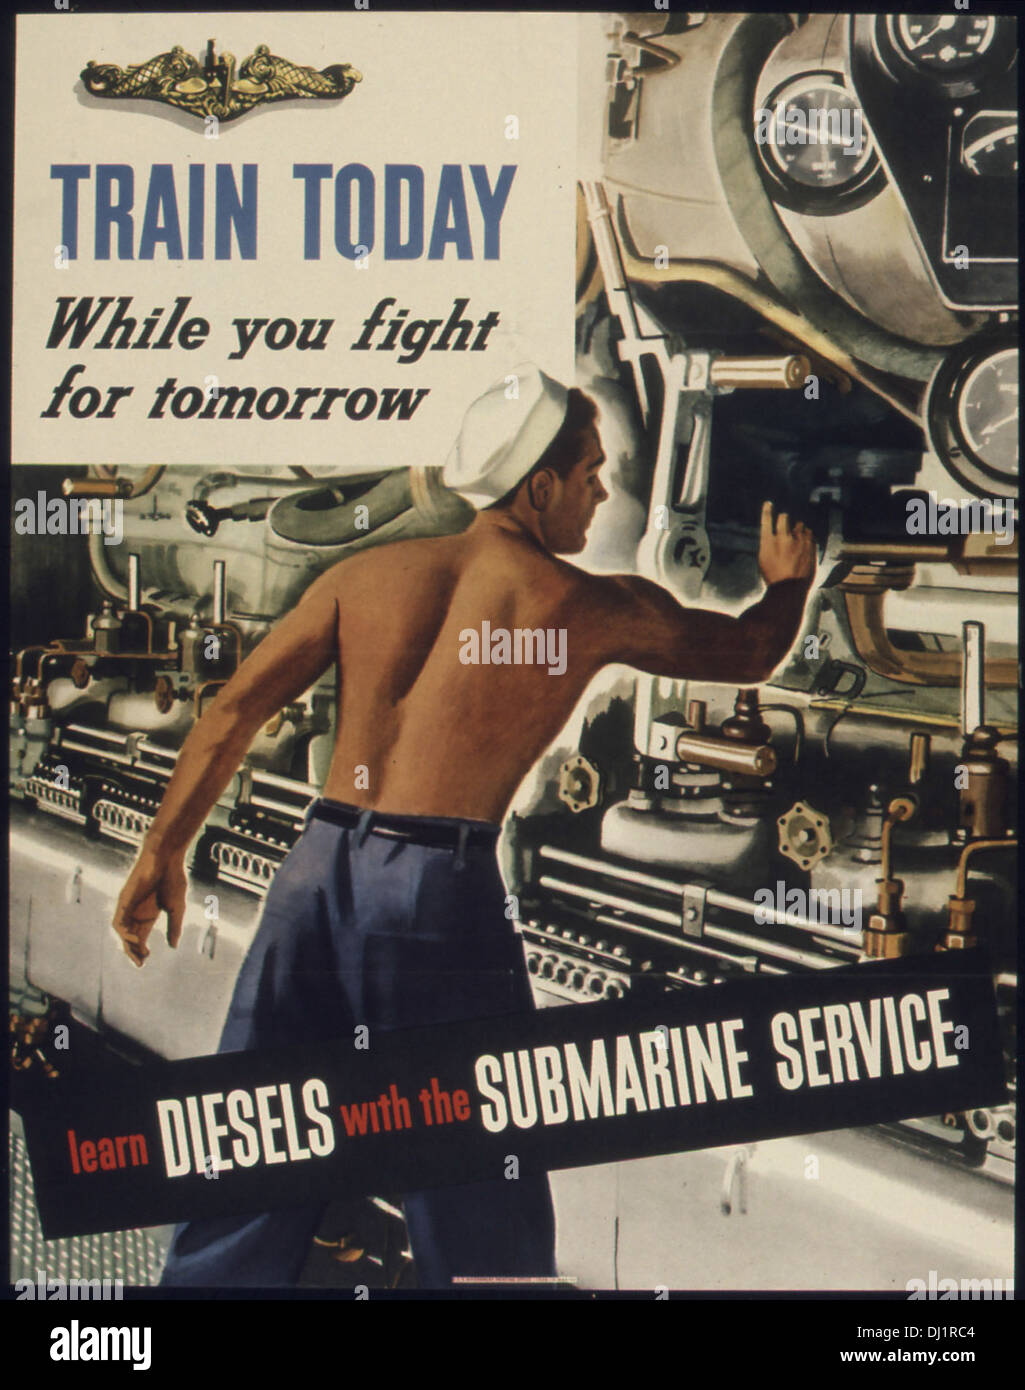 TRAIN TODAY WHILE YOU FIGHT FOR TOMORROW - LEARN DIESELS WITH THE SUBMARINE SERVICE. 871 Stock Photo